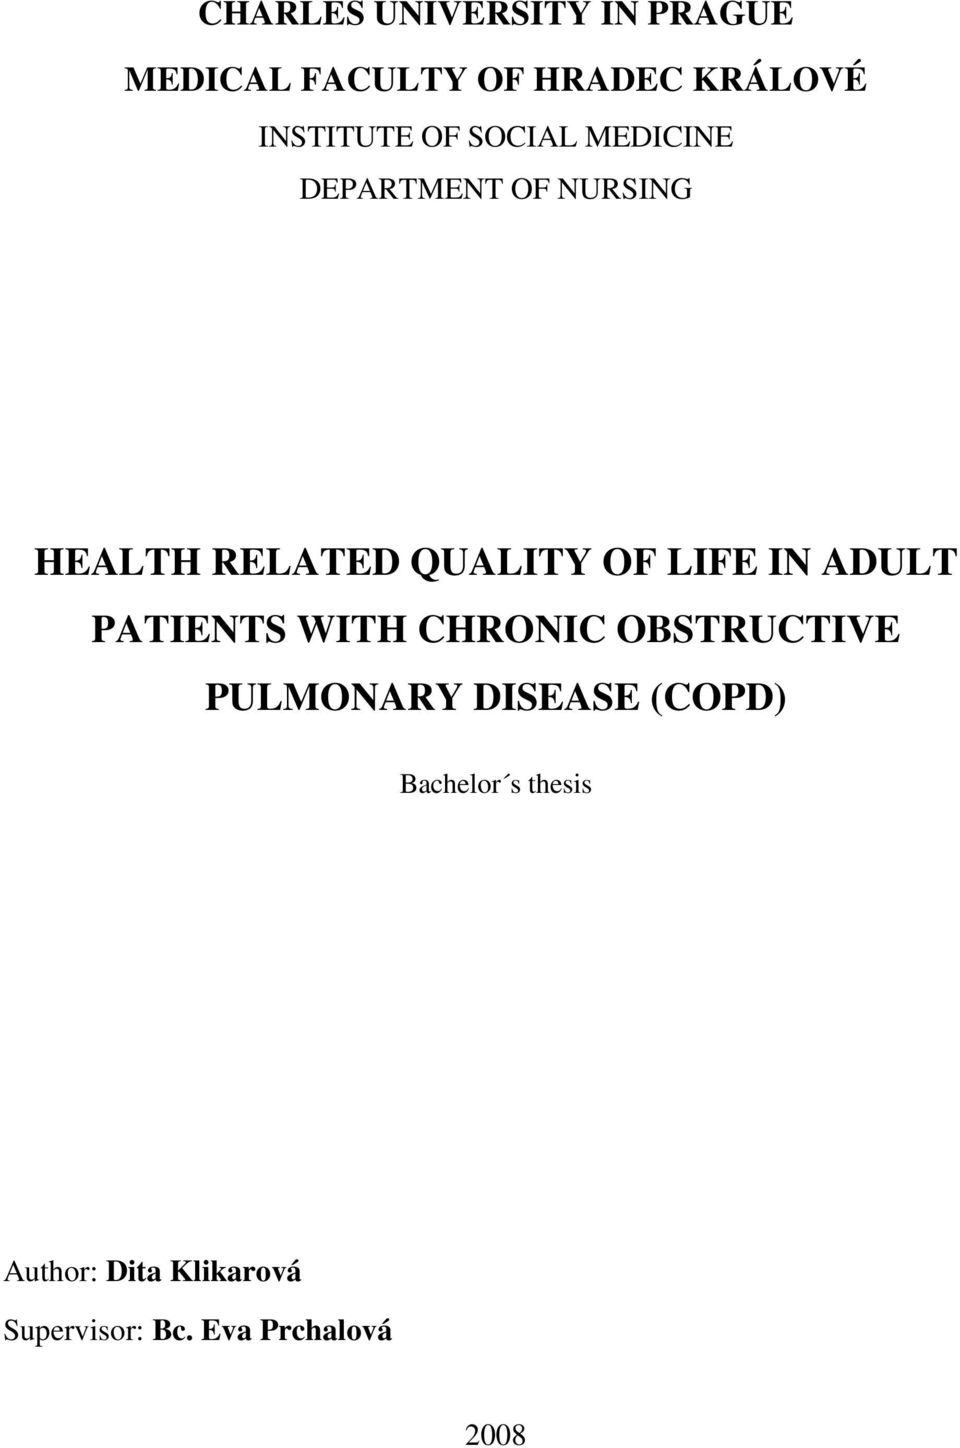 QUALITY OF LIFE IN ADULT PATIENTS WITH CHRONIC OBSTRUCTIVE PULMONARY